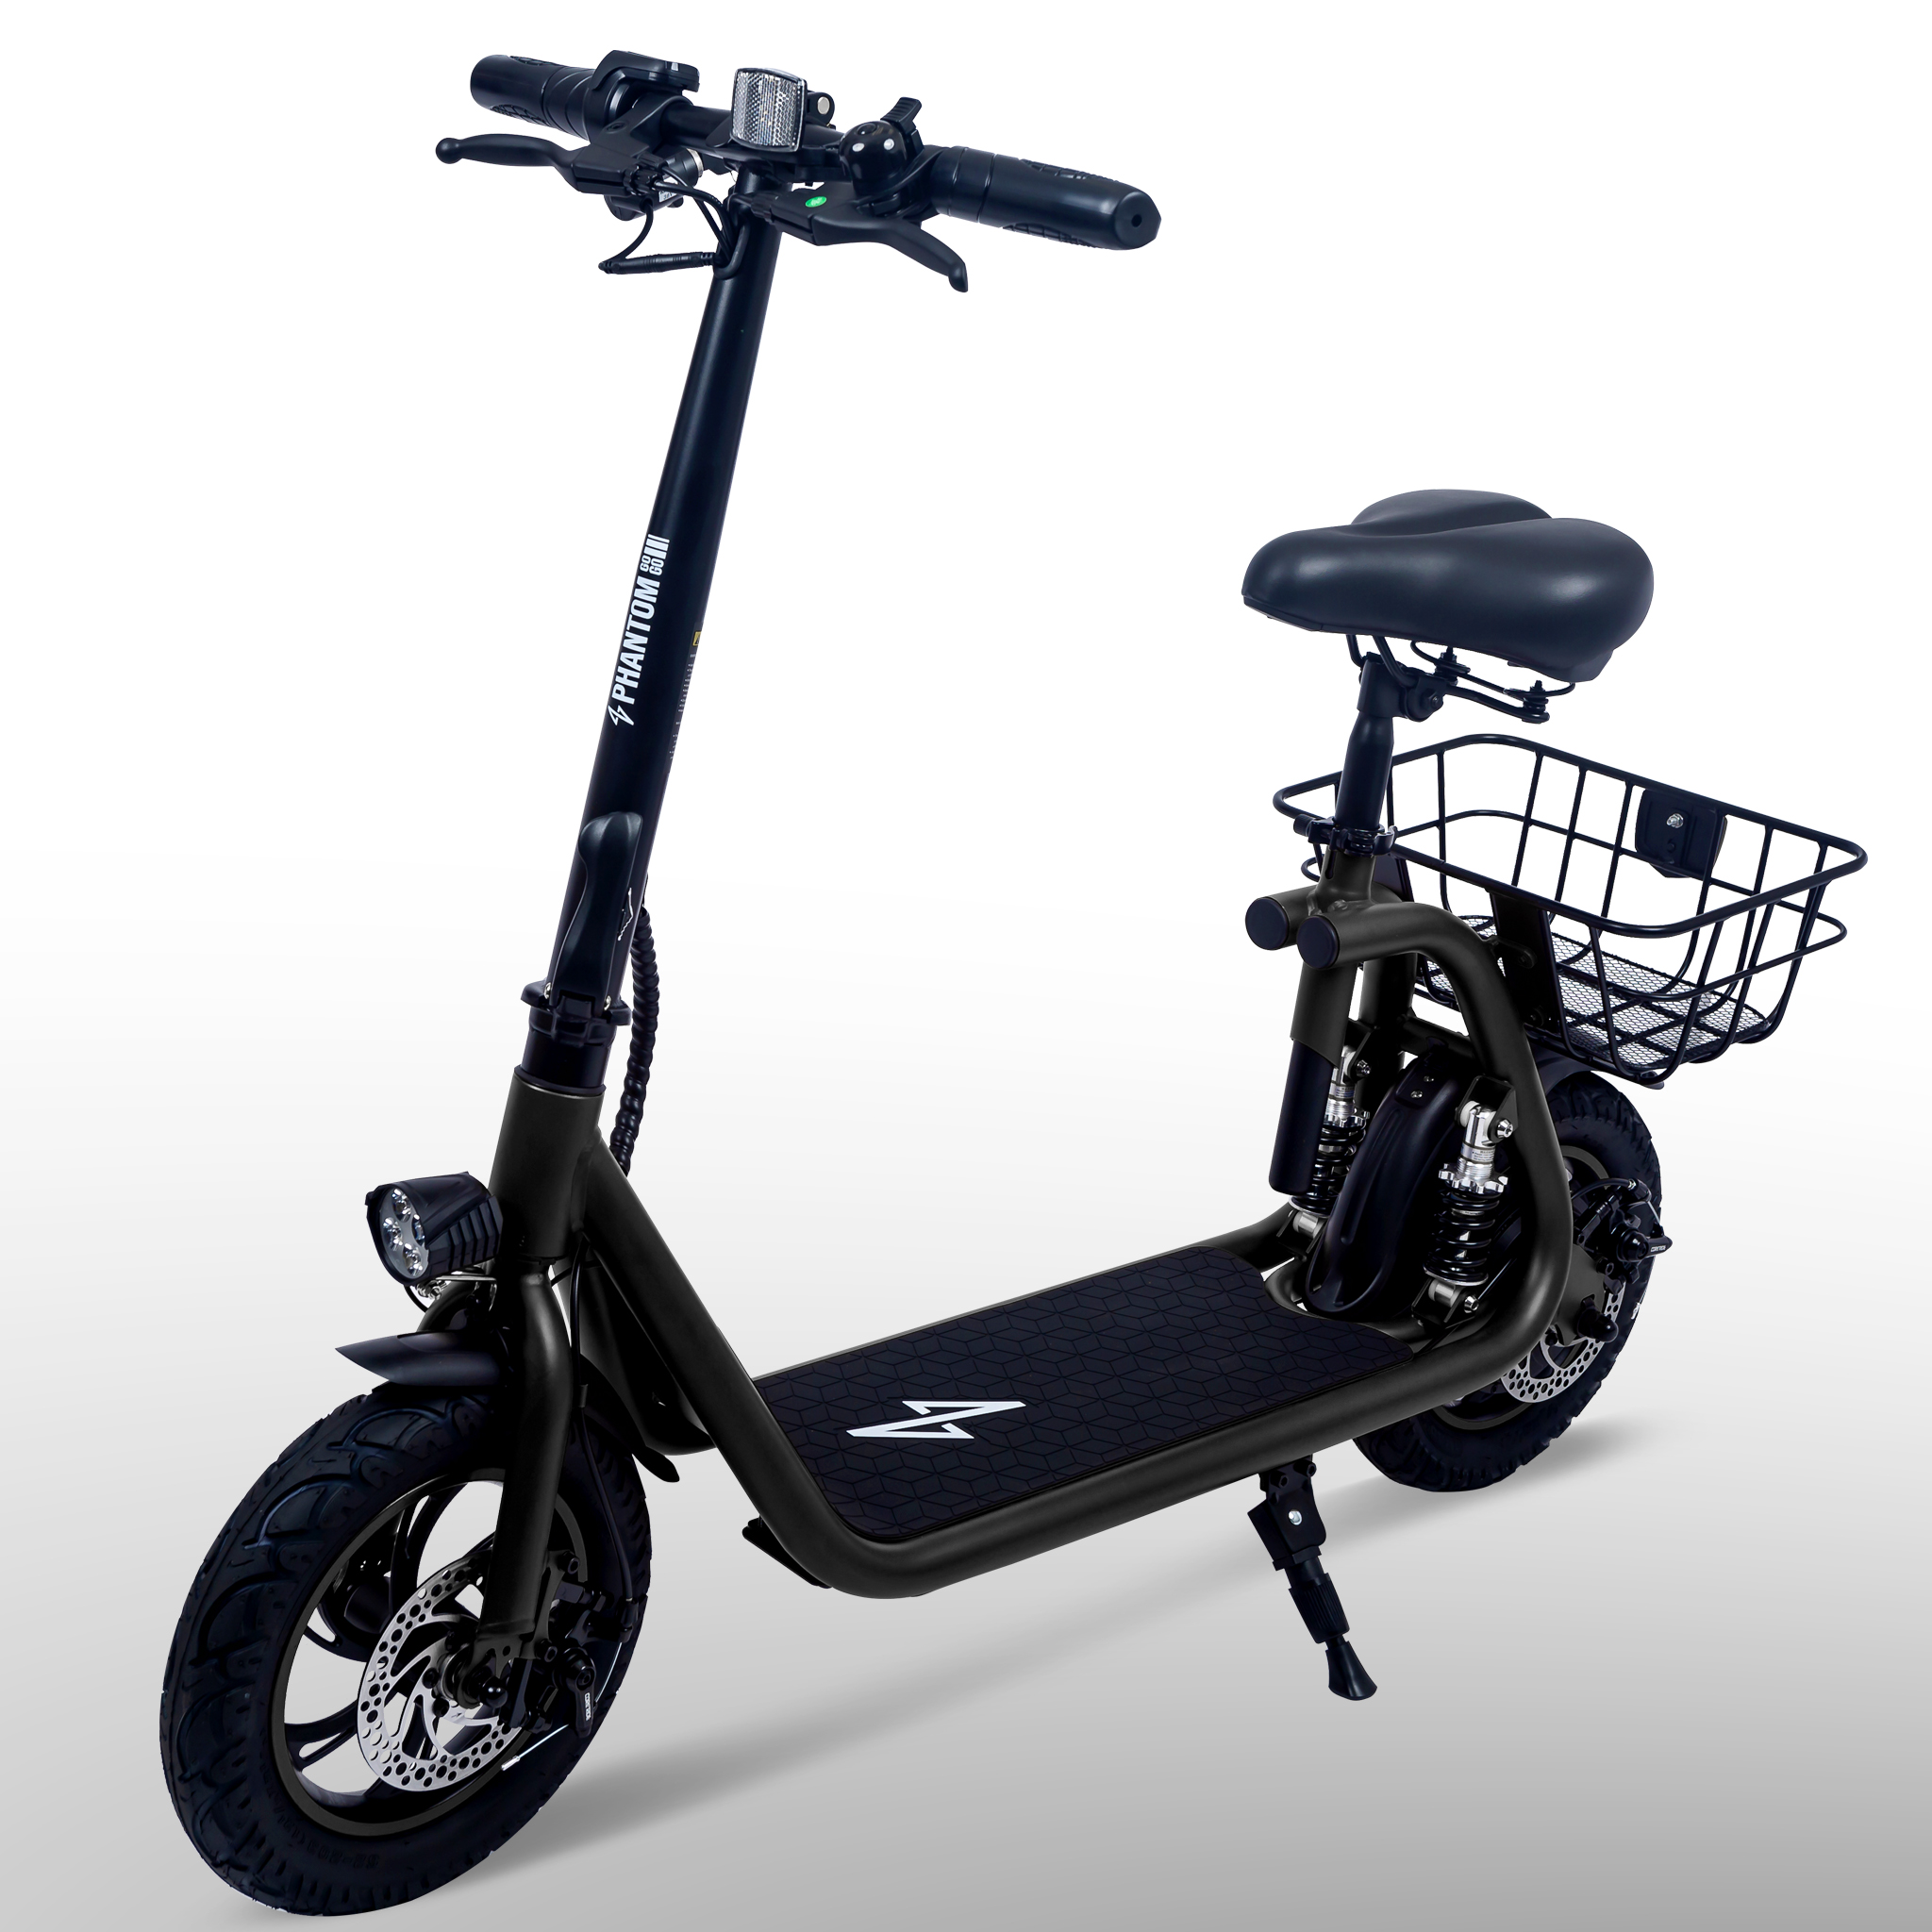 

Phantomgogo Commuter R1 Pro Electric Scooter For Adults Foldable Scooter With Seat & Carry Basket - 500w Brushless Motor 36v - 15mph 265lbs Max Load